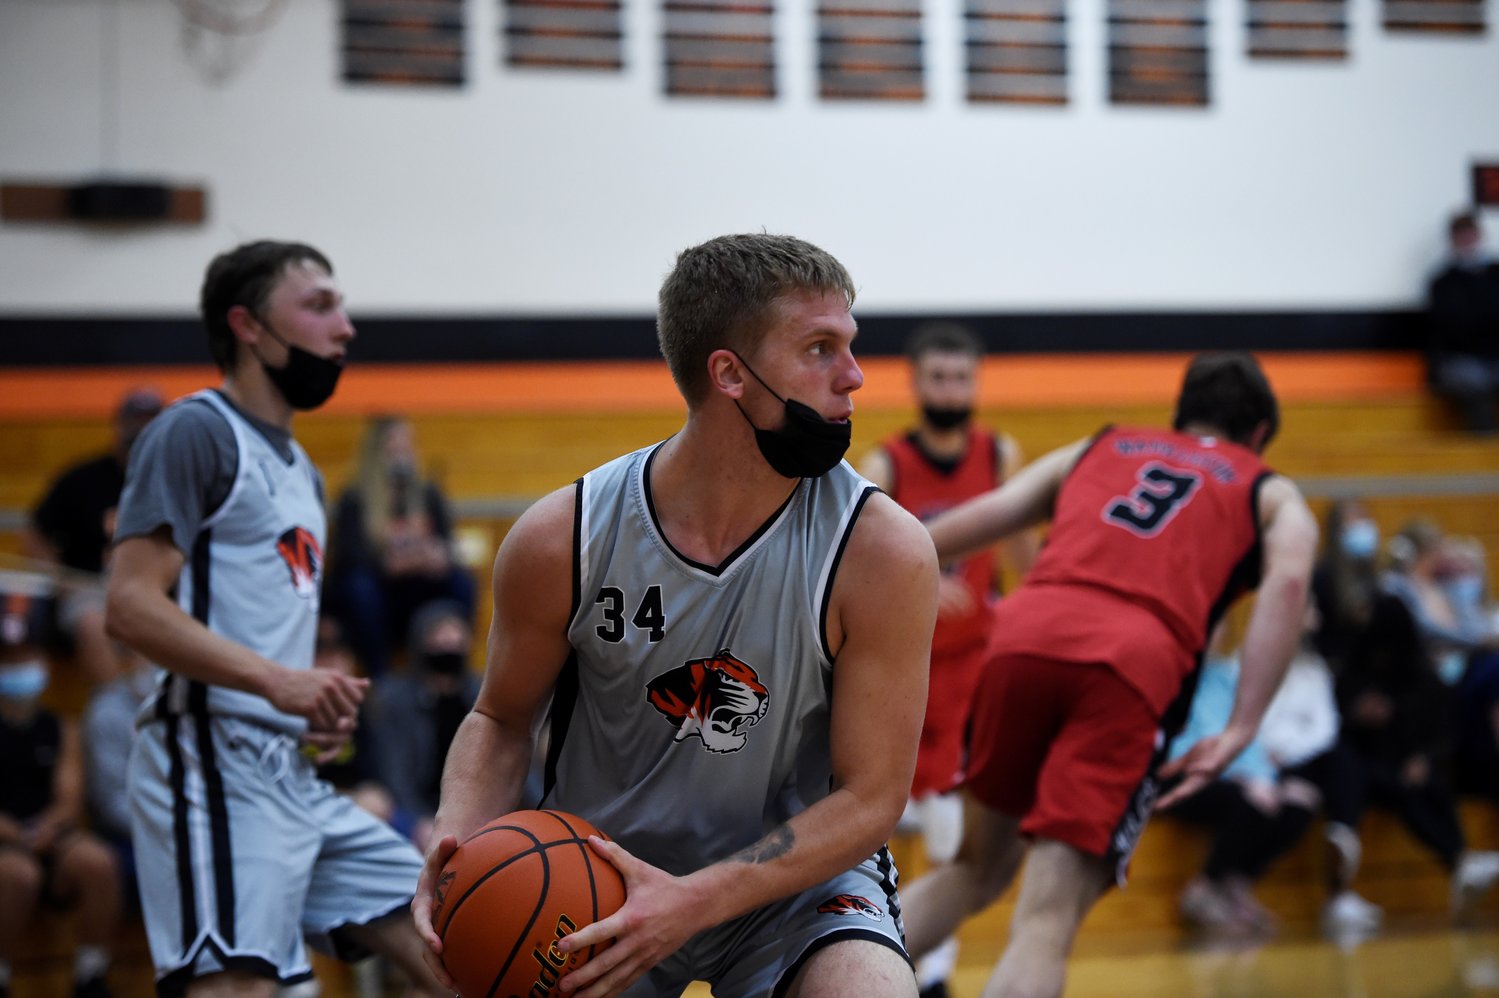 Napavine's Cade Evander looks for an open pass against Wahkiakum on Tuesday.